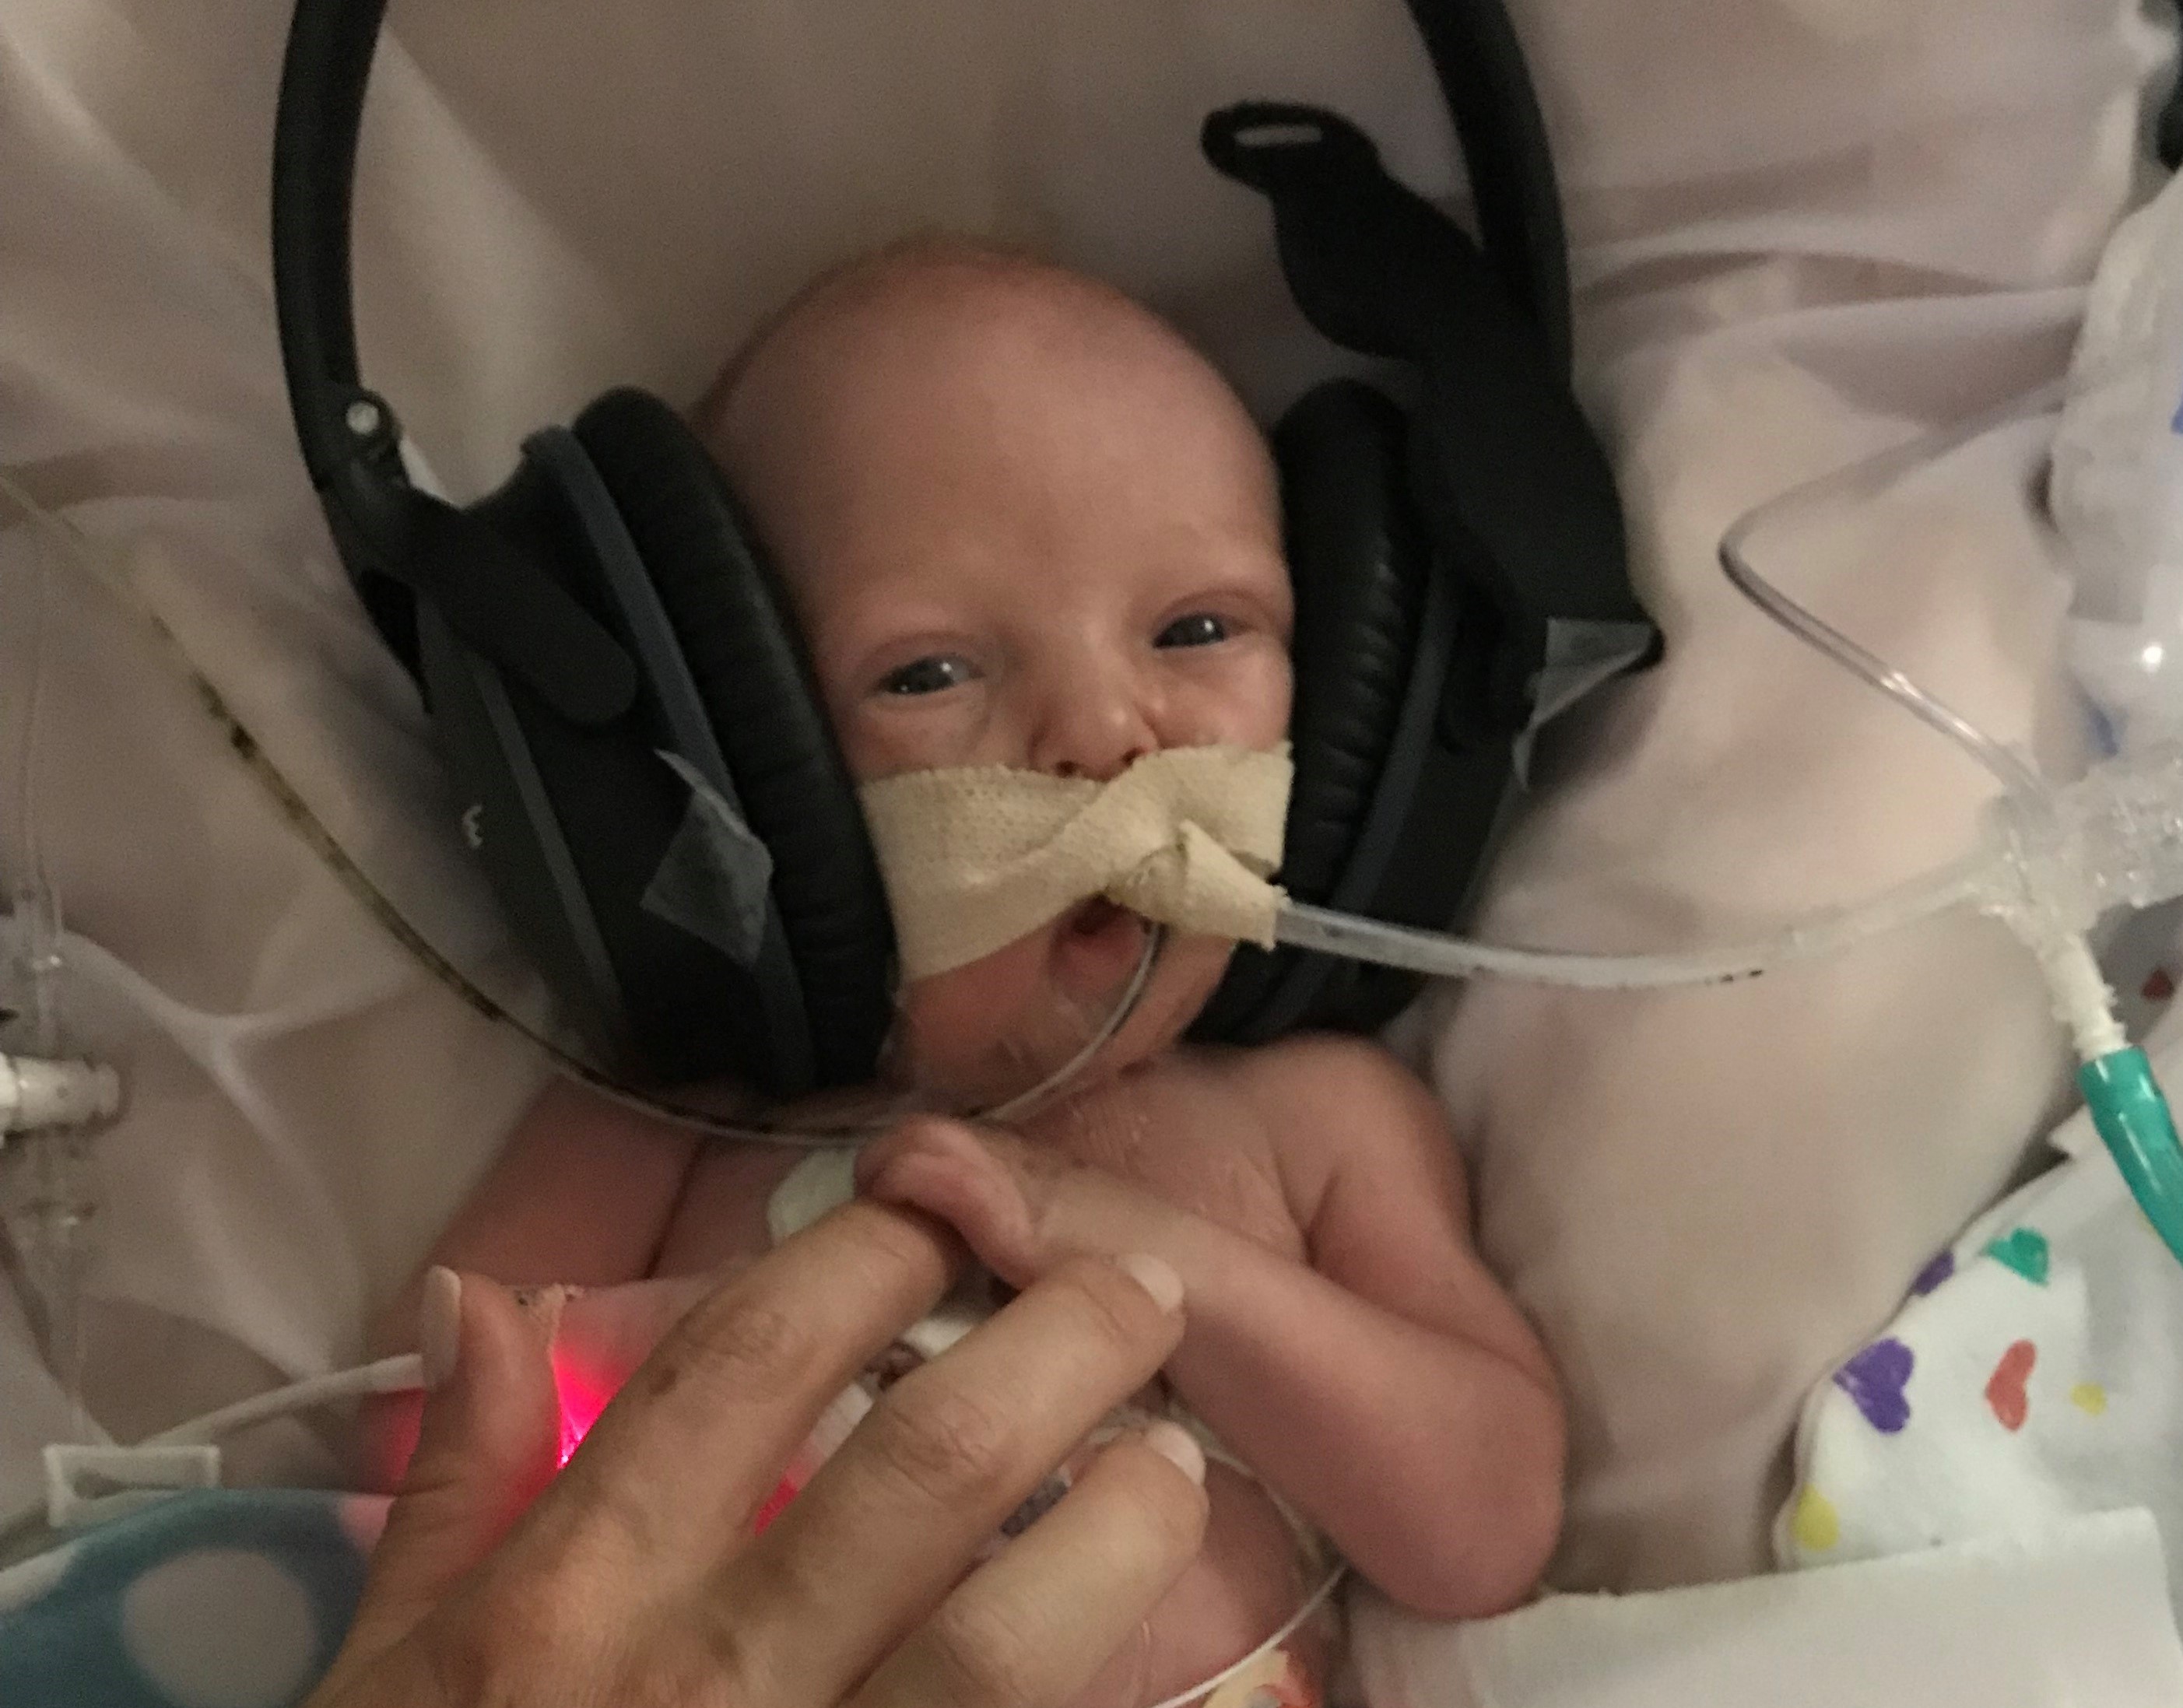 A premature baby hooked up to tubes and wires sits listening to music on giant headphones that dwarf his little head.